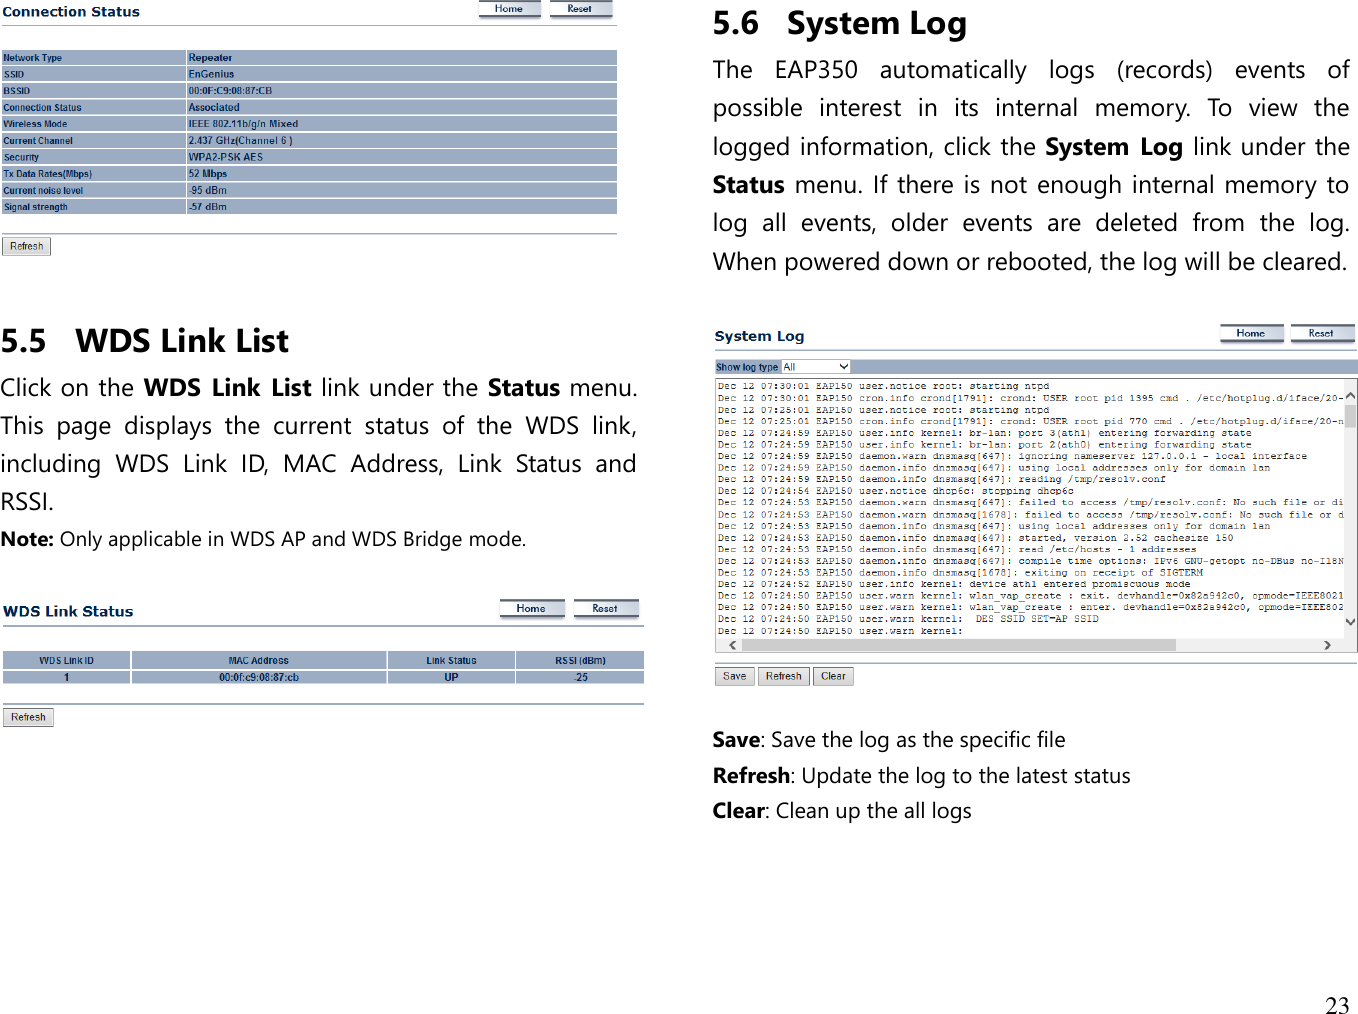 23    5.5 WDS Link List Click on the WDS Link  List link under the Status menu. This  page  displays  the  current  status  of  the  WDS  link, including  WDS  Link  ID,  MAC  Address,  Link  Status  and RSSI. Note: Only applicable in WDS AP and WDS Bridge mode.        5.6 System Log The  EAP350  automatically  logs  (records)  events  of possible  interest  in  its  internal  memory.  To  view  the logged information, click the System Log link under the Status menu. If there is not enough internal memory to log  all  events,  older  events  are  deleted  from  the  log. When powered down or rebooted, the log will be cleared.    Save: Save the log as the specific file Refresh: Update the log to the latest status Clear: Clean up the all logs  